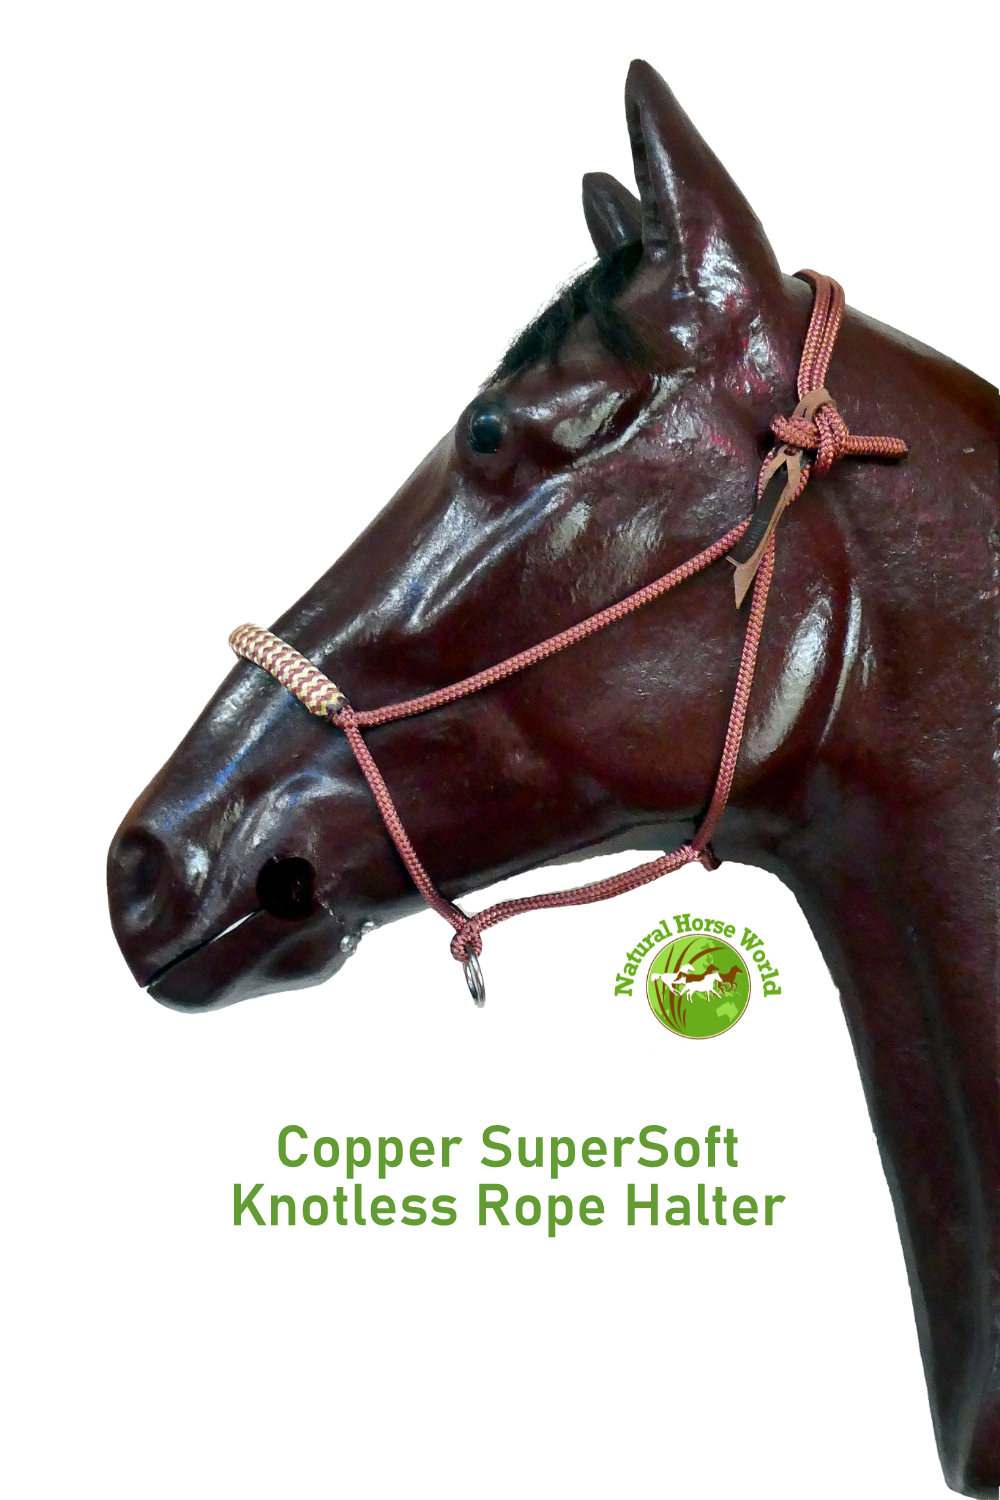 SuperSoft Knotless Rope Halter - Supersoft